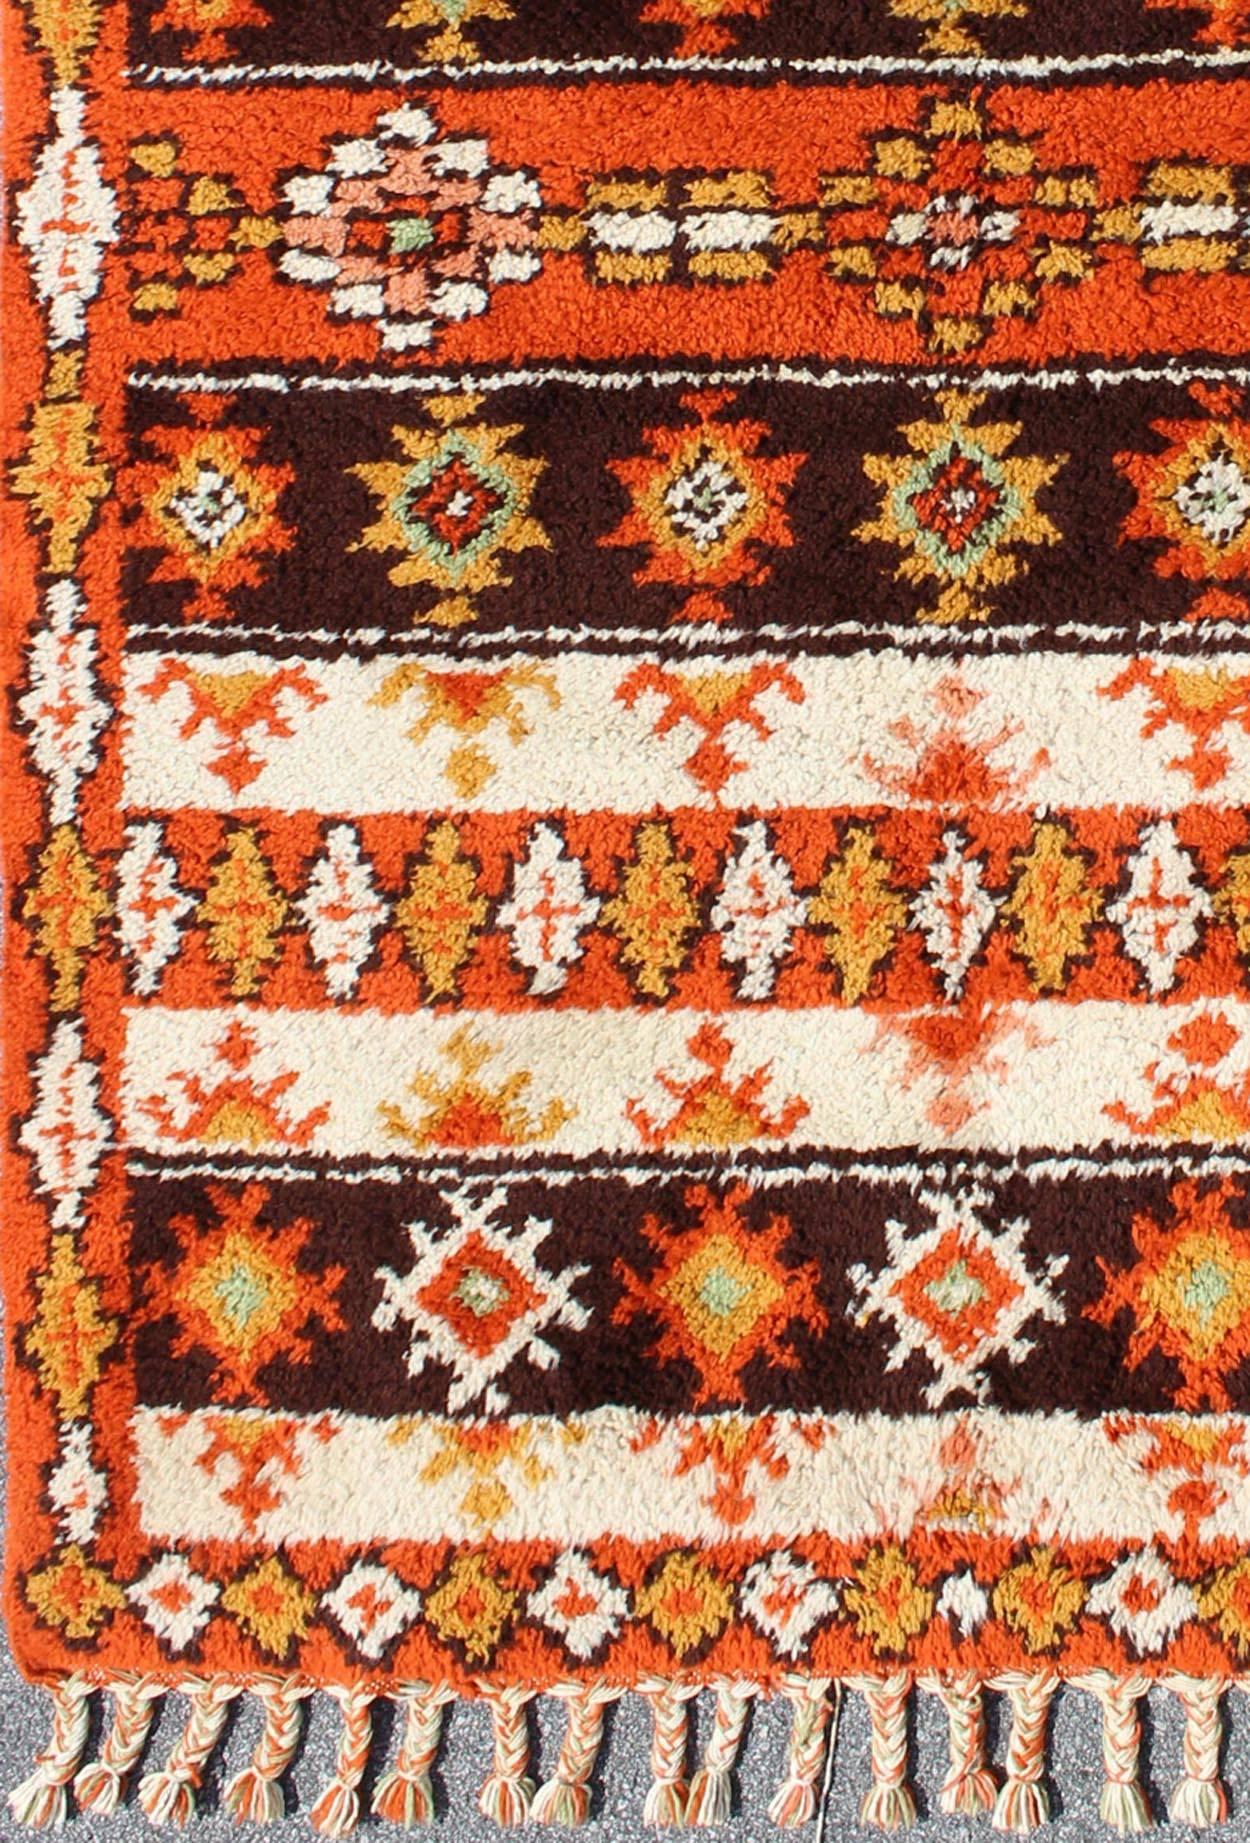 Vintage Moroccan Berber Rug, Keivan Woven Arts / rug 13-1202, country of origin / type: Morocco / Tribal, circa Late-20th Century.

Measures: 6' x 9'.

This colorful Vintage Moroccan rug, features a vibrant burnt orange, ivory, yellow and dark brown